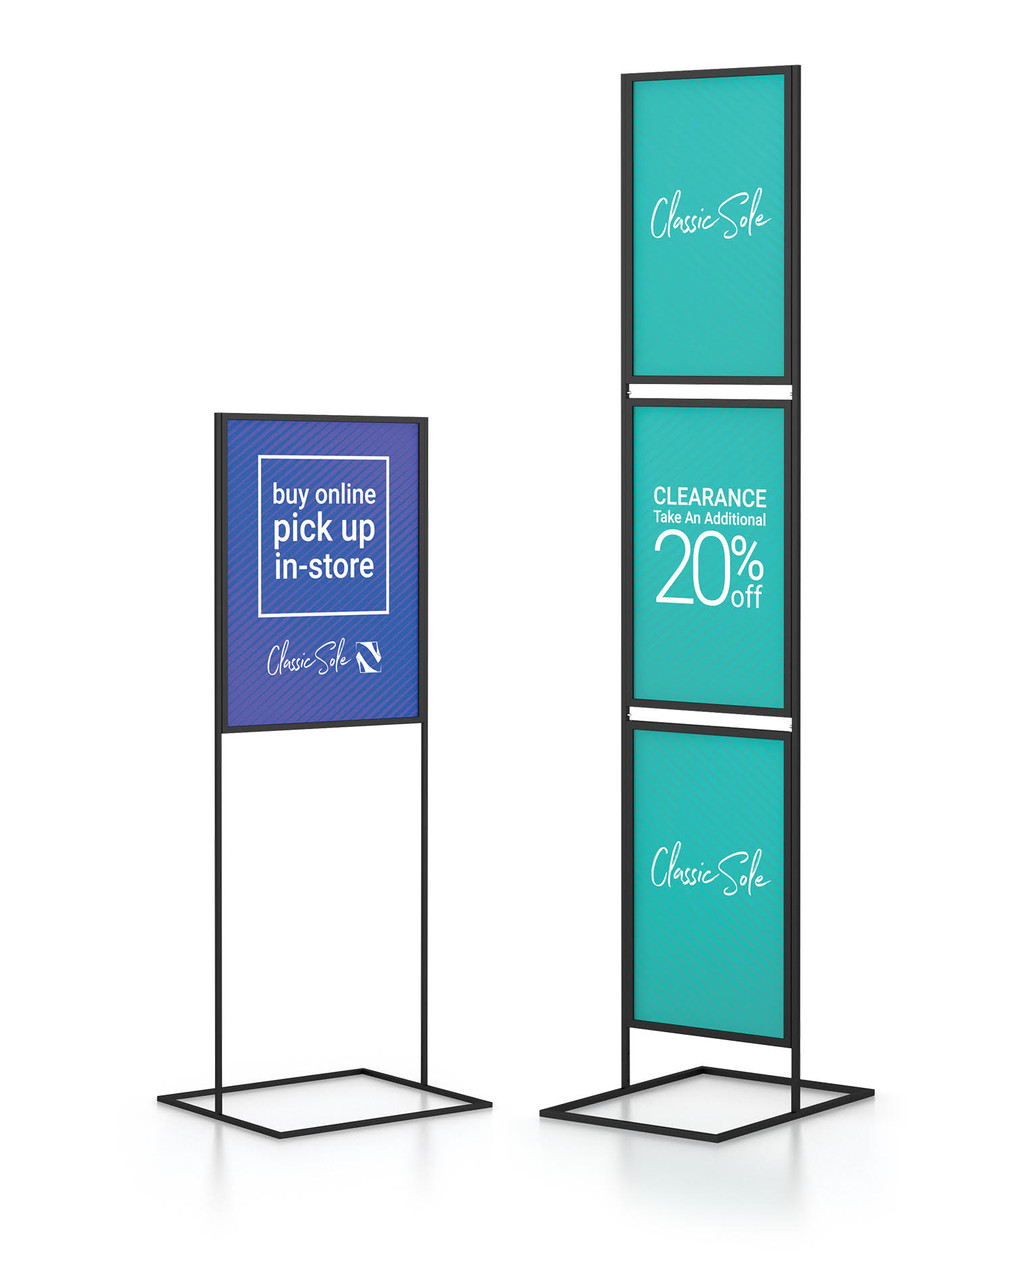 Poster Sign Holder Floor Stand 22 x 28